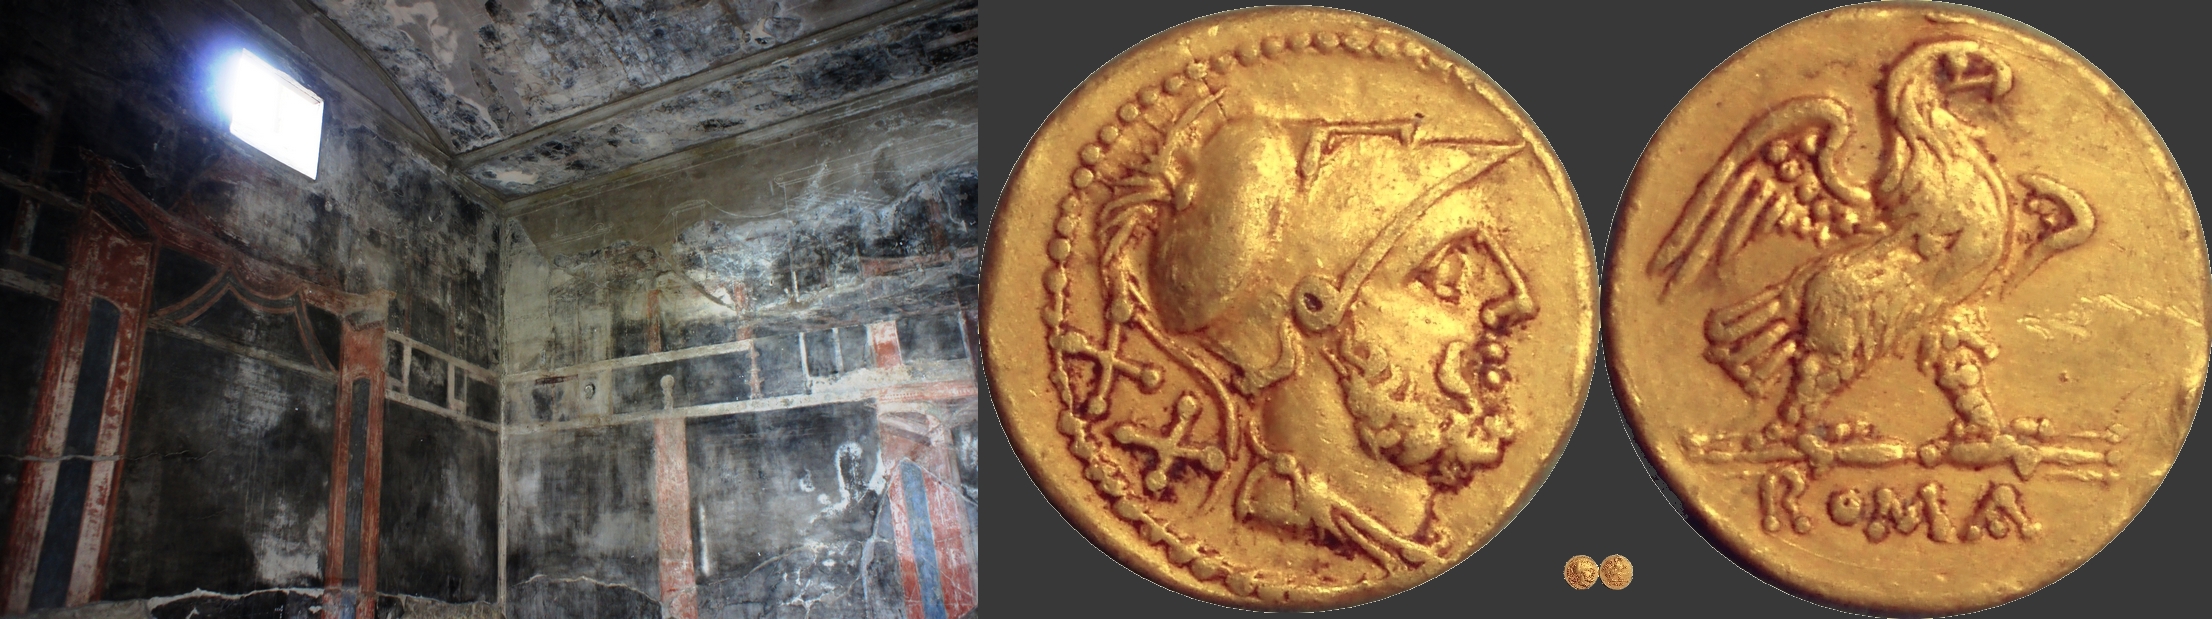 44-4 gold coin with Mars and Eagle of the 2nd Punic War, and display of wealth in a large Herculaneum dining room, the House of the Black Salon